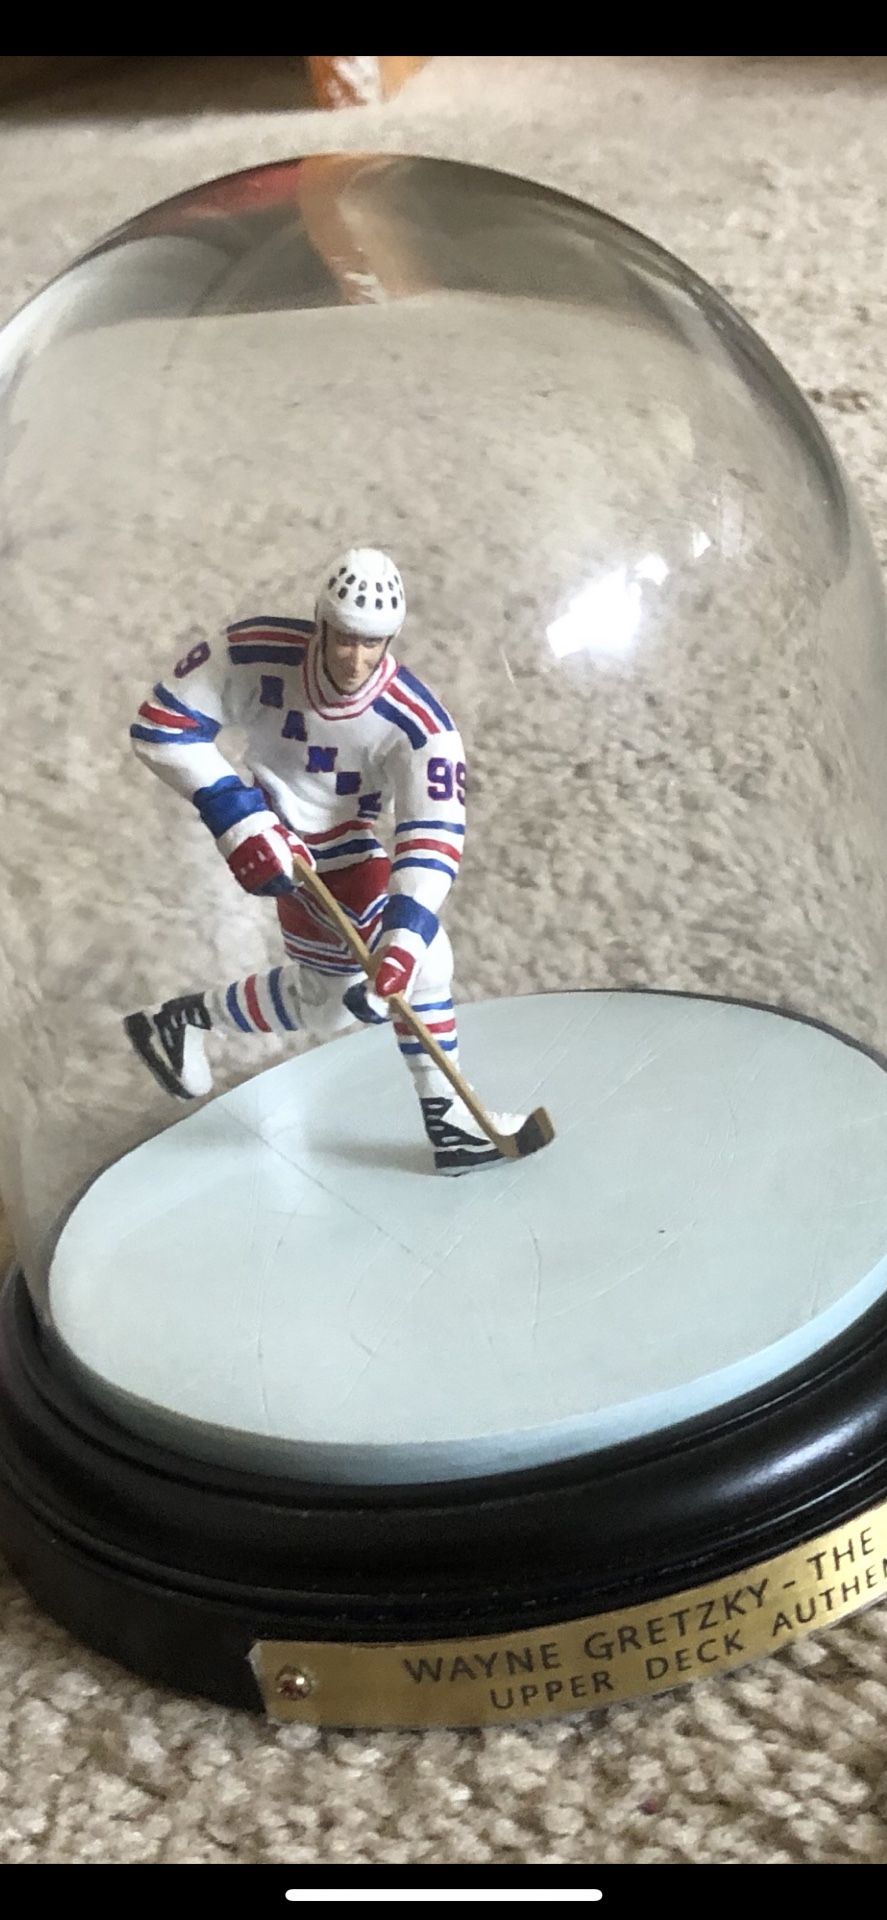 WAYNE GRETZKY IN ACTION FIGURINE IN GLASS DOME